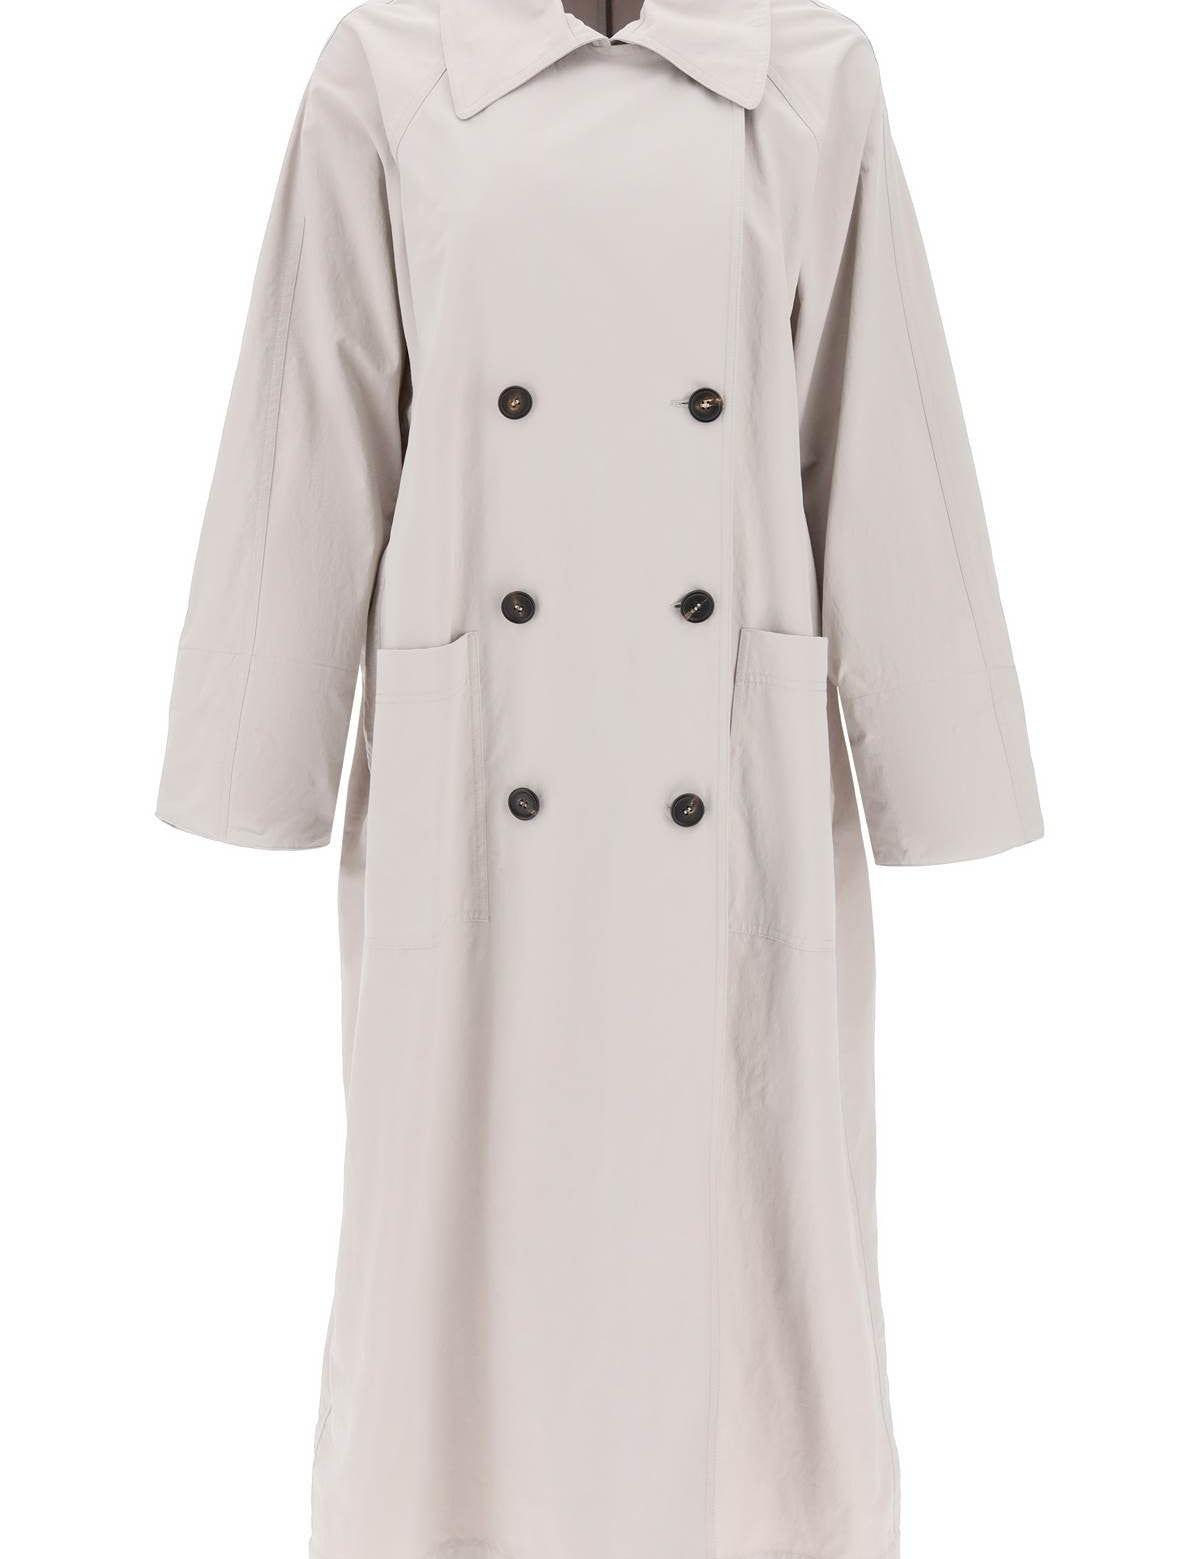 brunello-cucinelli-double-breasted-trench-coat-with-shiny-cuff-details.jpg